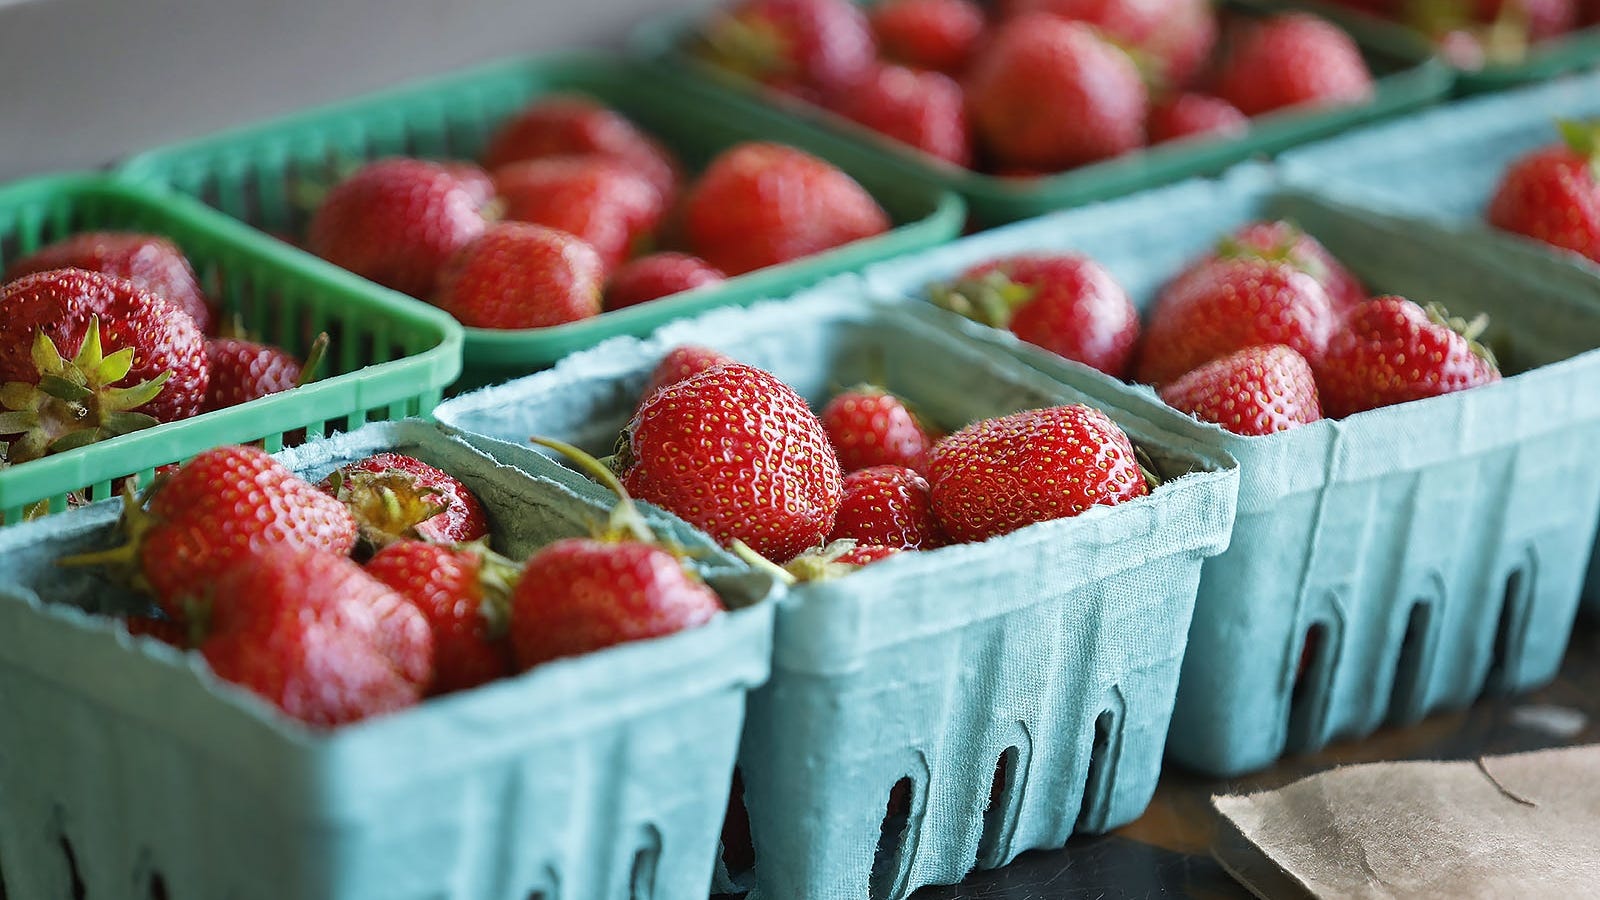 Strawberry shortage at grocery store? Here's why